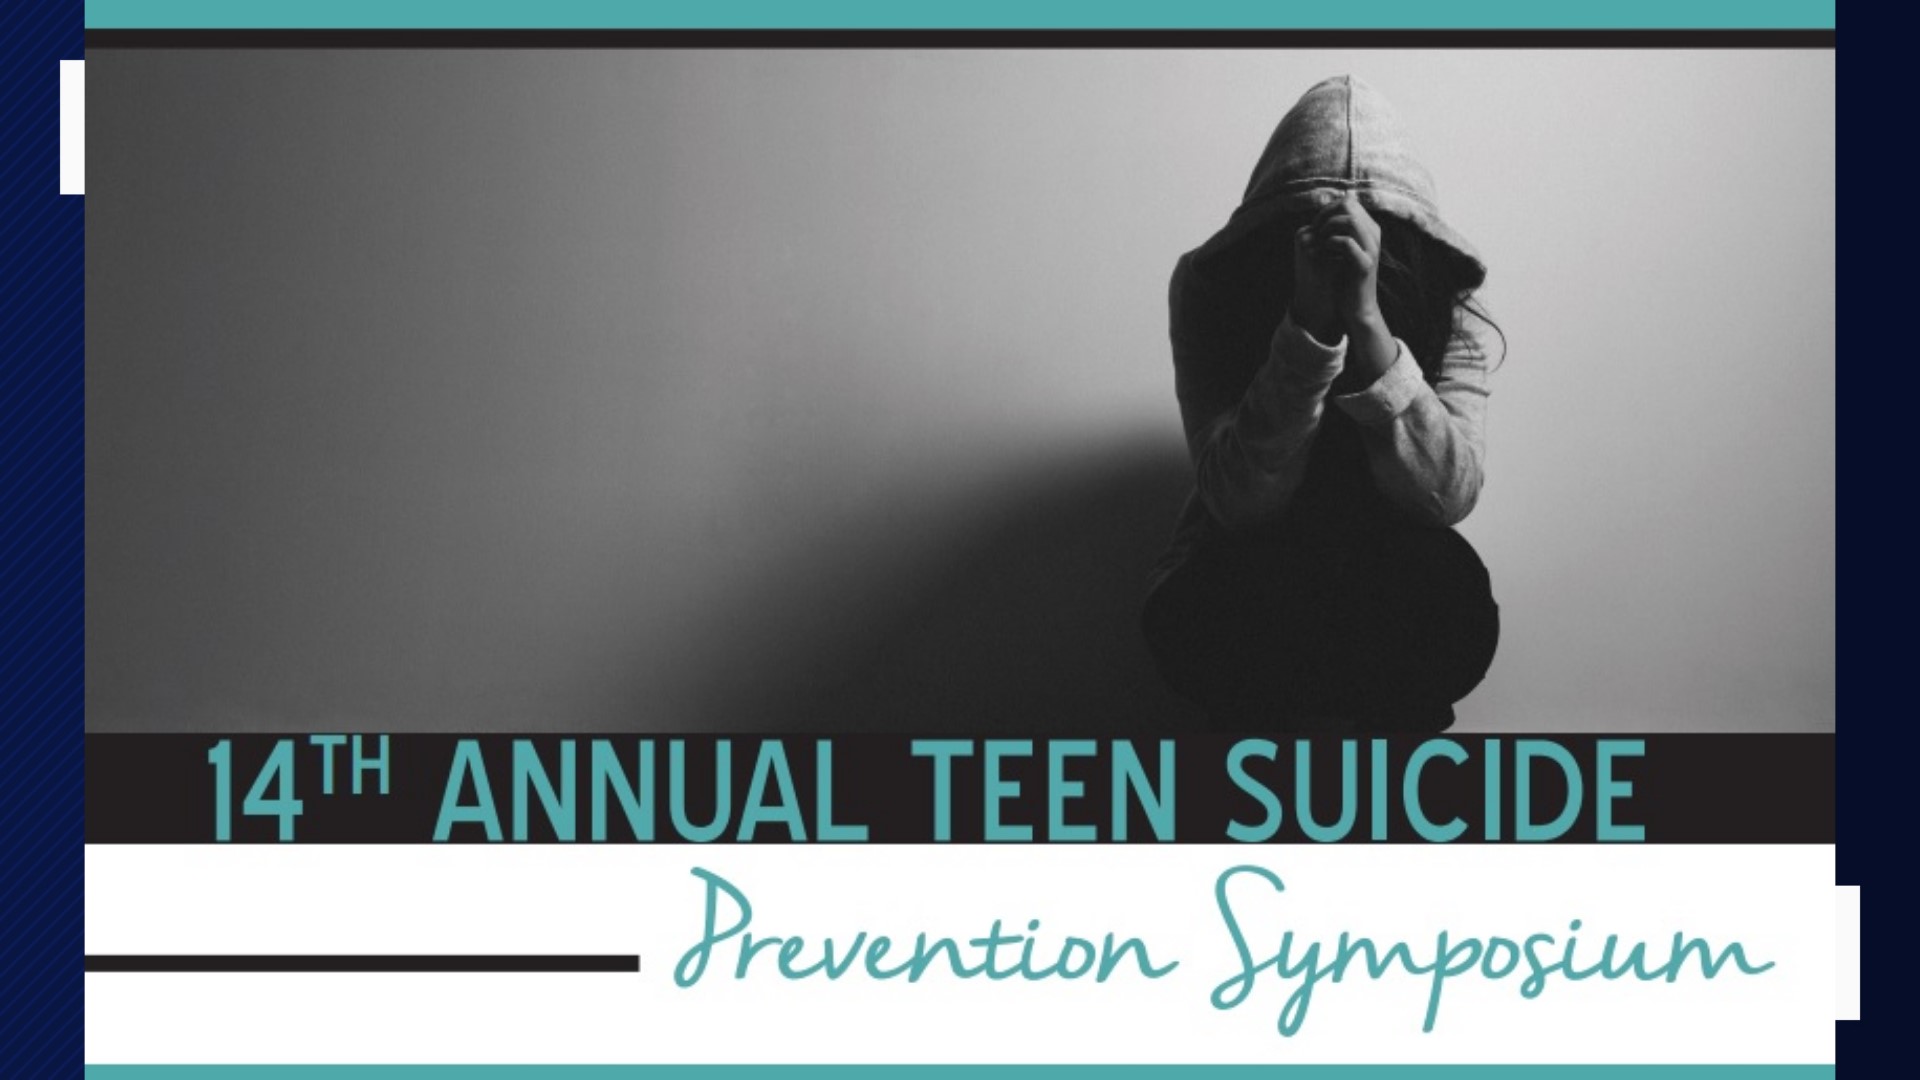 The Region 12 Education Service Center is hosting their 14th Annual Teen Suicide Prevention Symposium Thursday from 8:30 a.m. to 4 p.m.